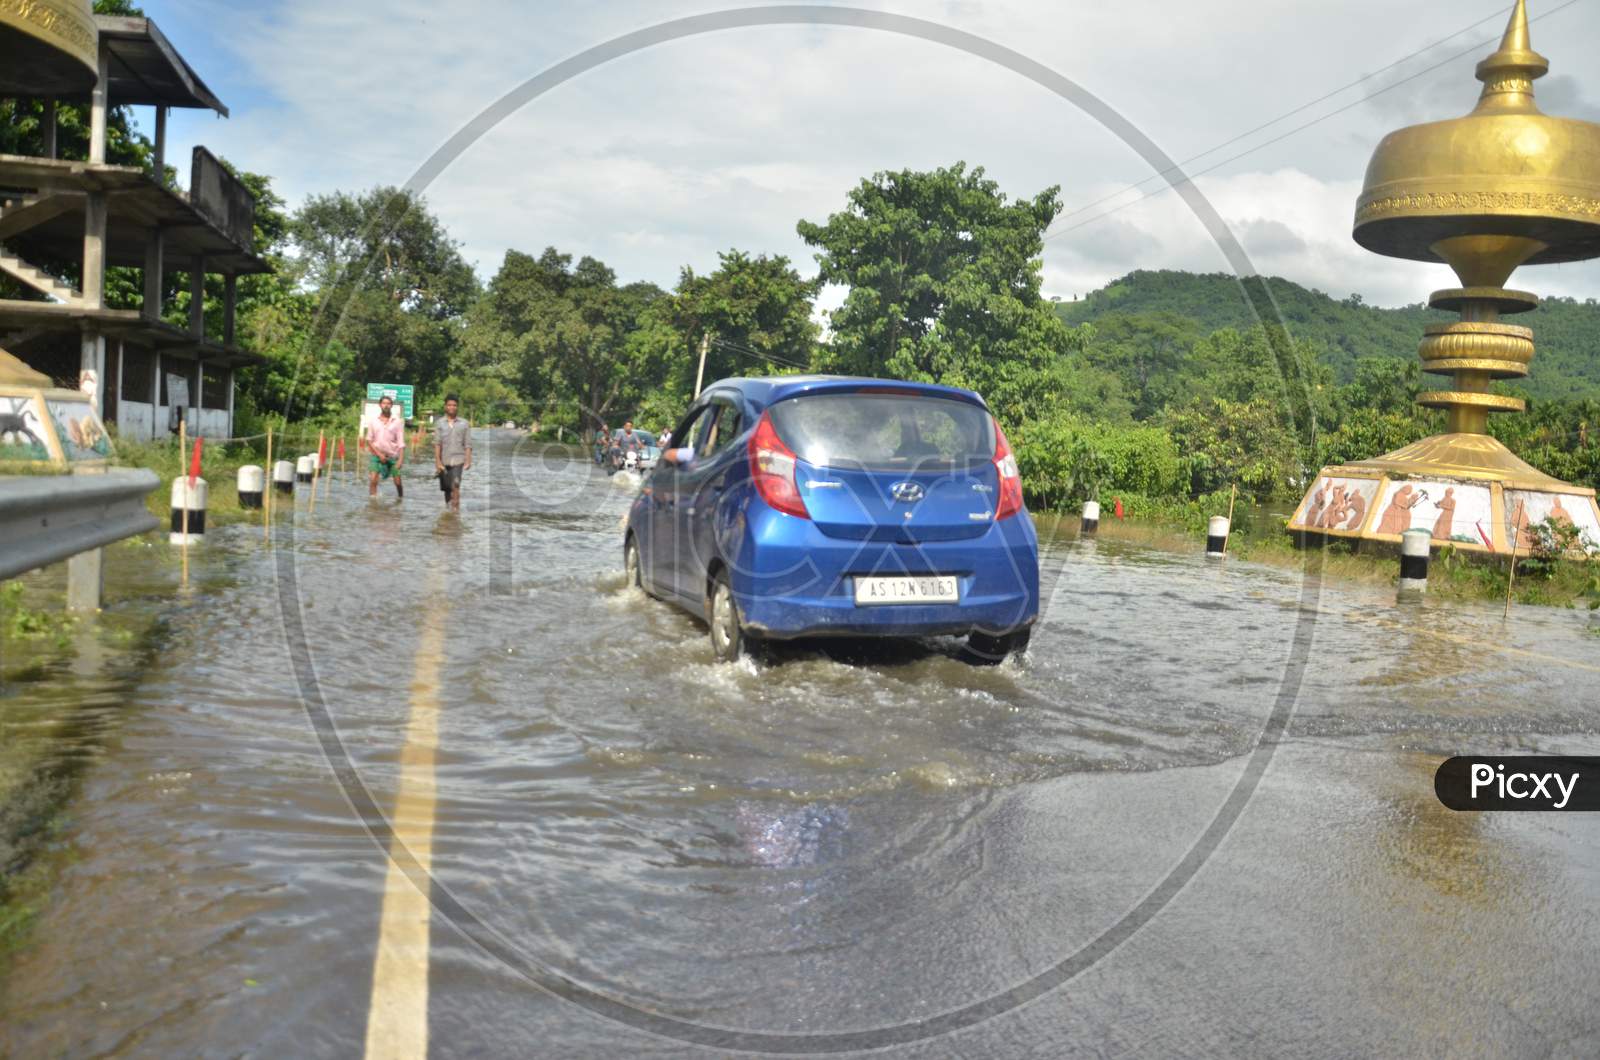 A Car going in a flooded highway in Kaziranga National Park on 26th July 2016